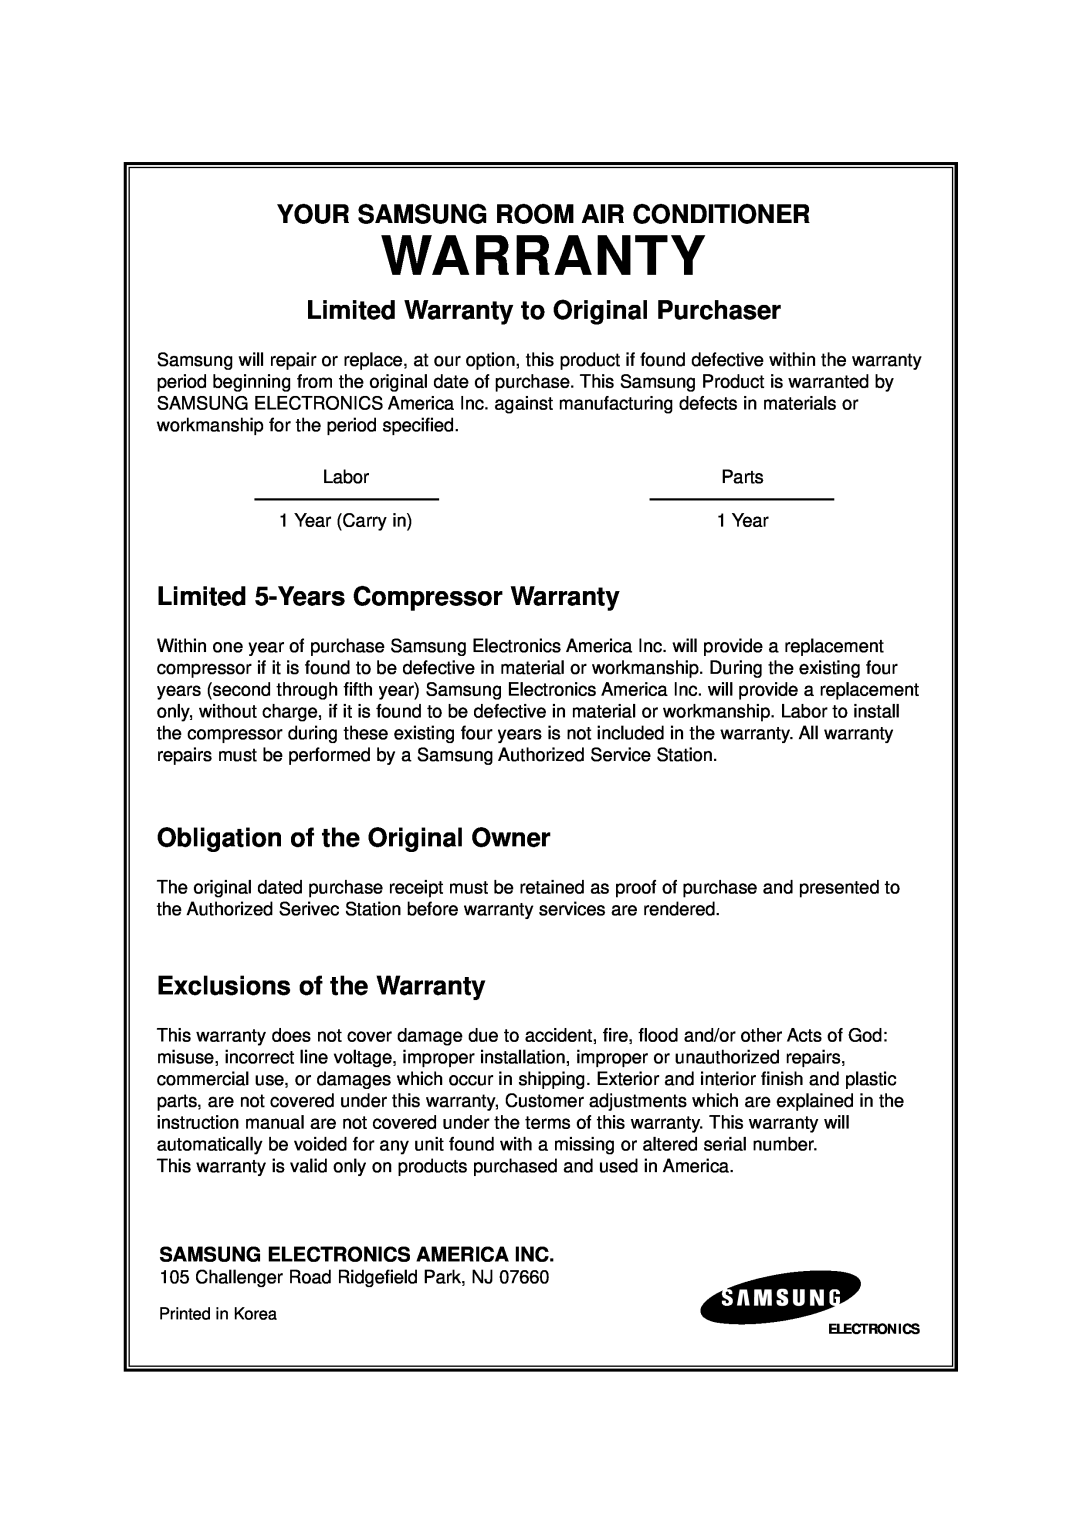 Samsung AW0529 manual Limited 5-YearsCompressor Warranty, Obligation of the Original Owner, Exclusions of the Warranty 